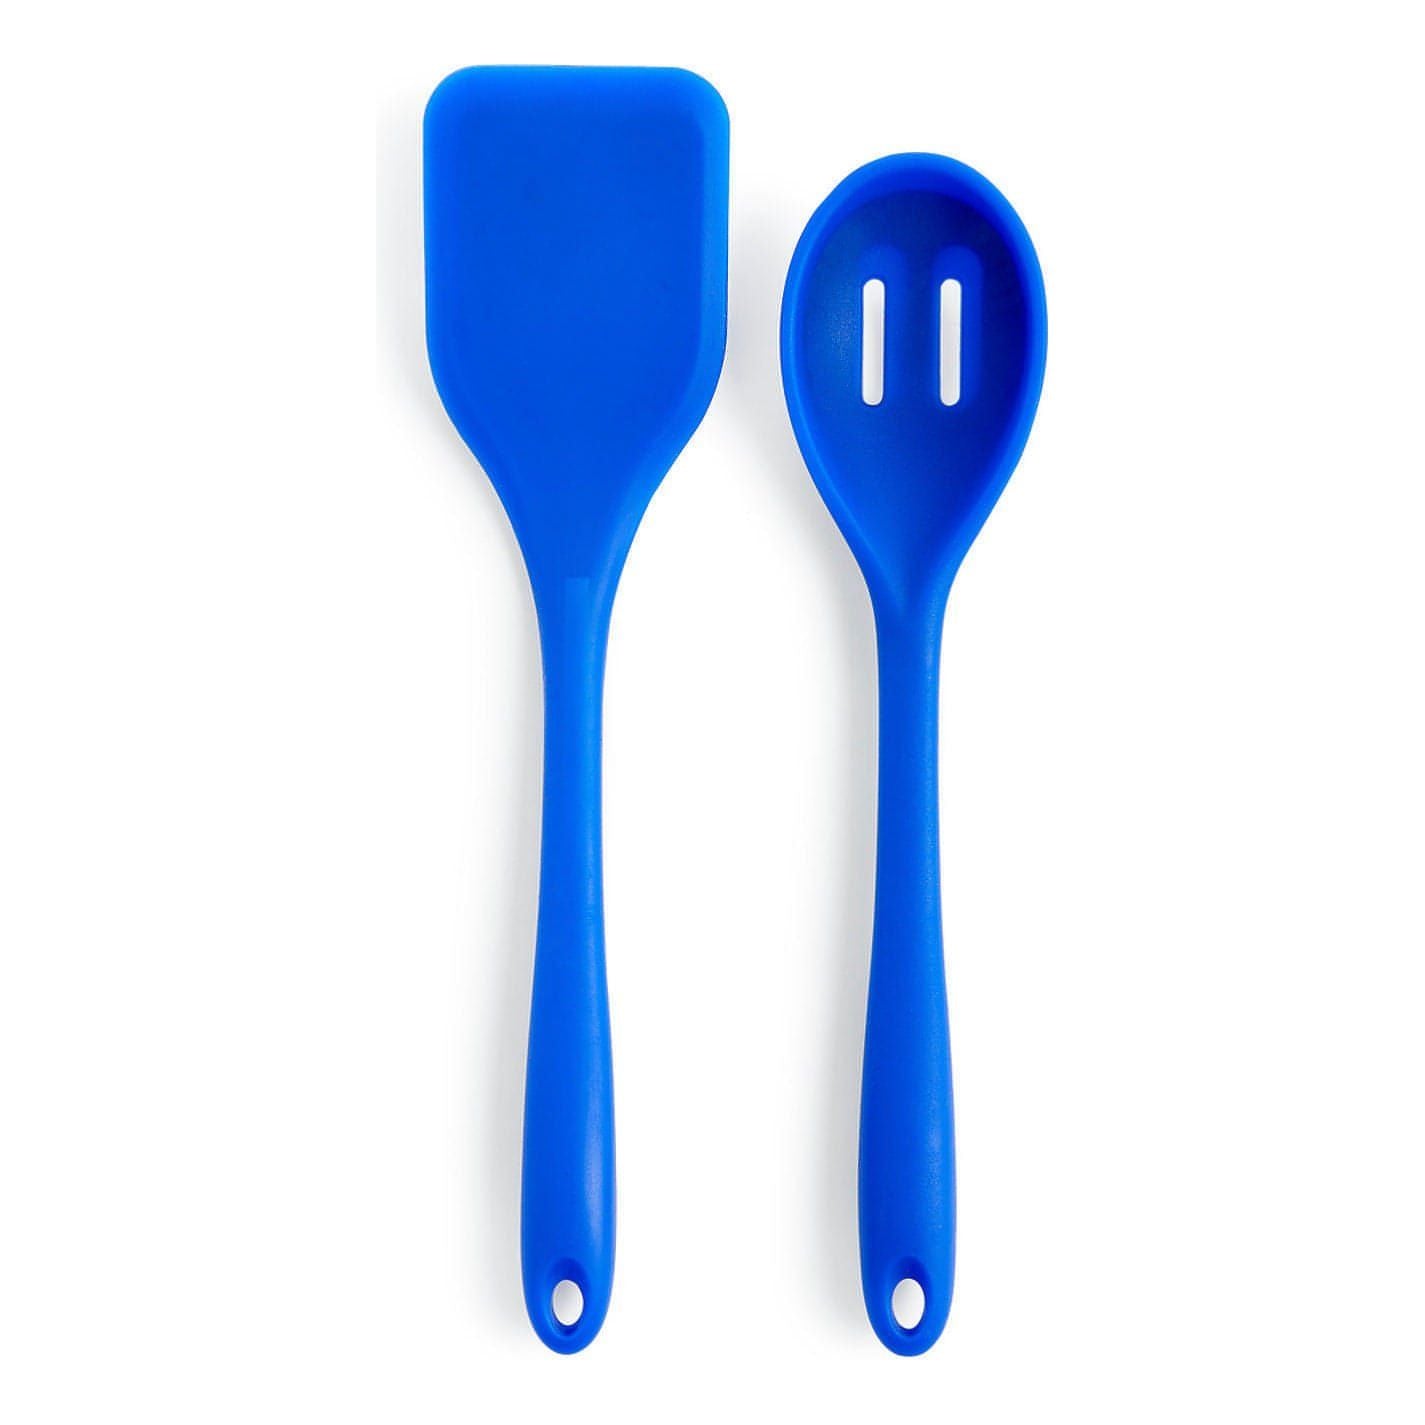 Art & Cook-Art & Cook Silicone Solid Turner & Slotted Spoon, Set of 2 (Blue) - Brandat Outlet